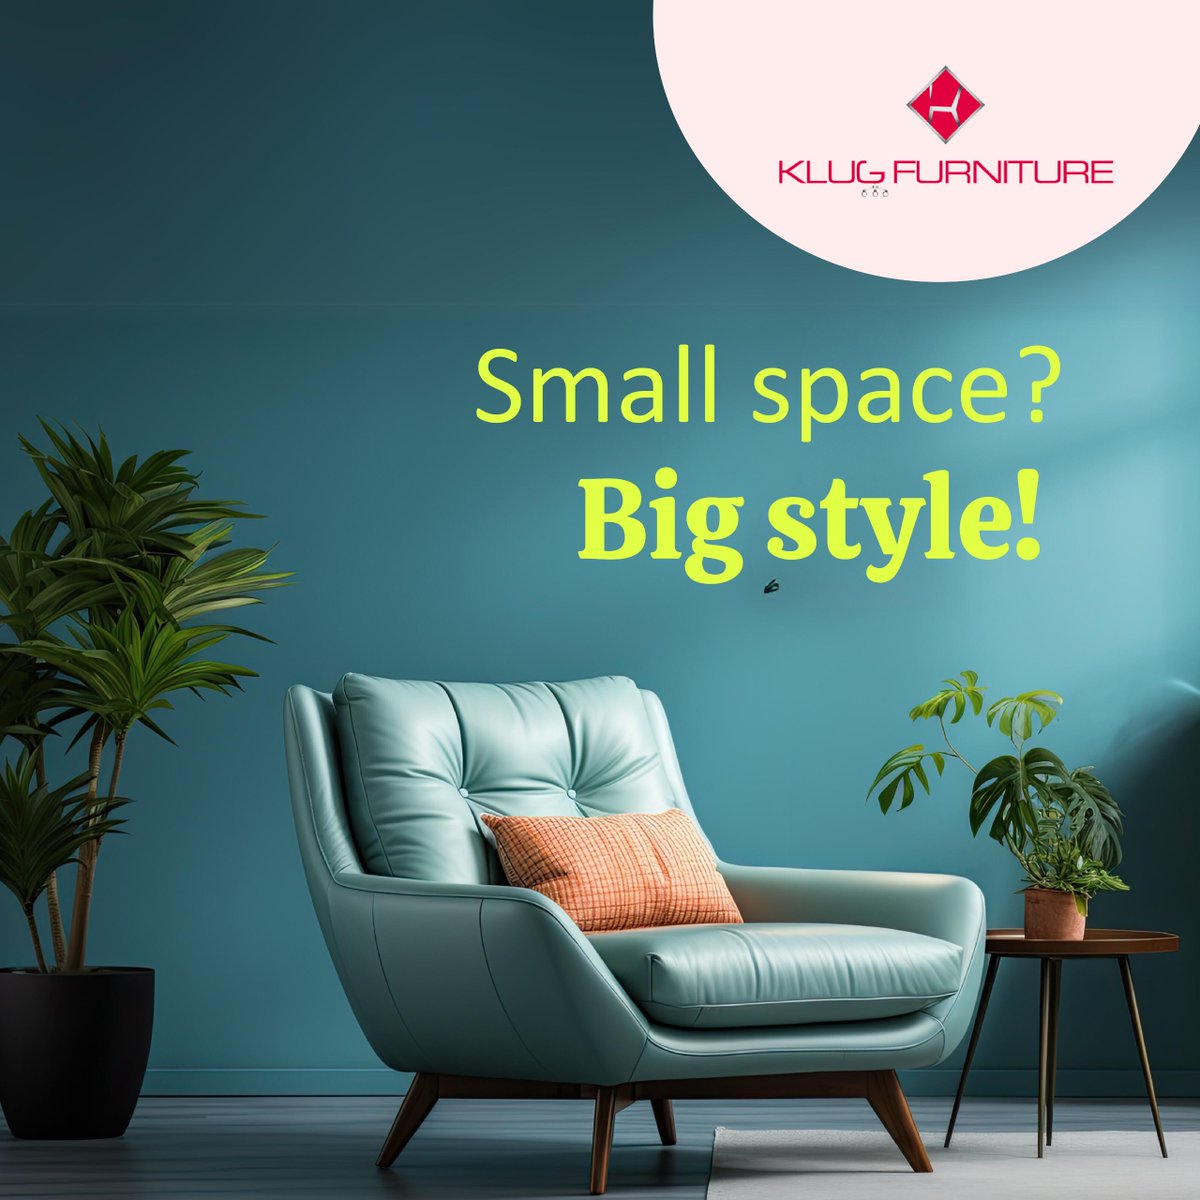 Klug Furniture offers space-saving furniture solutions that combine functionality with elegant design. Welcome to the world of compact luxury!

klugfurniture.com

#KlugComfort #klugfurniture #furnituredesign #interiordesign #furnituregoals #homefurniture #modernfurniture